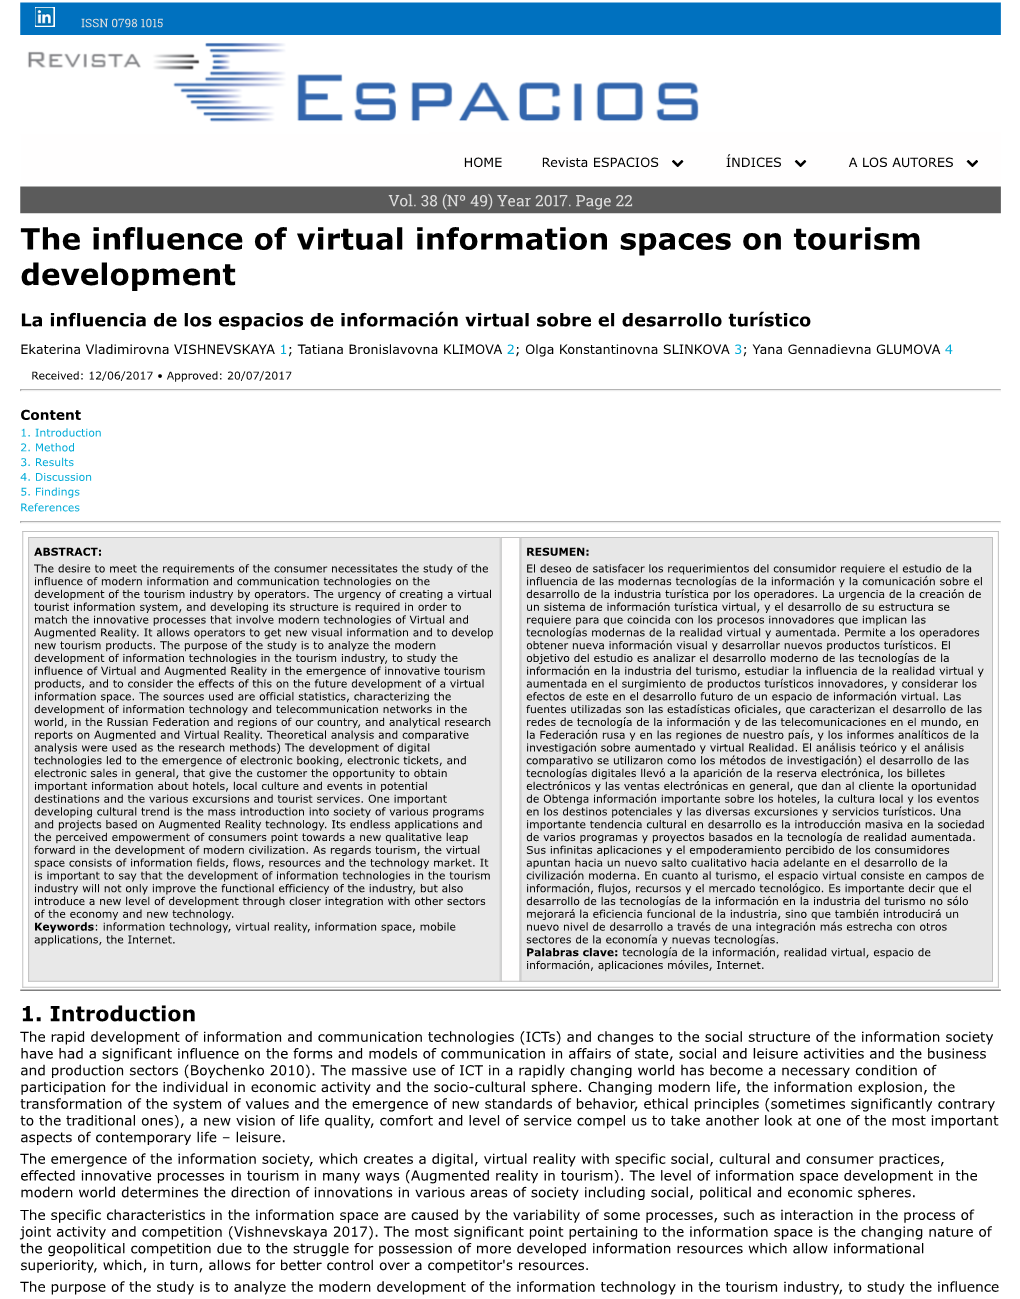 The Influence of Virtual Information Spaces on Tourism Development